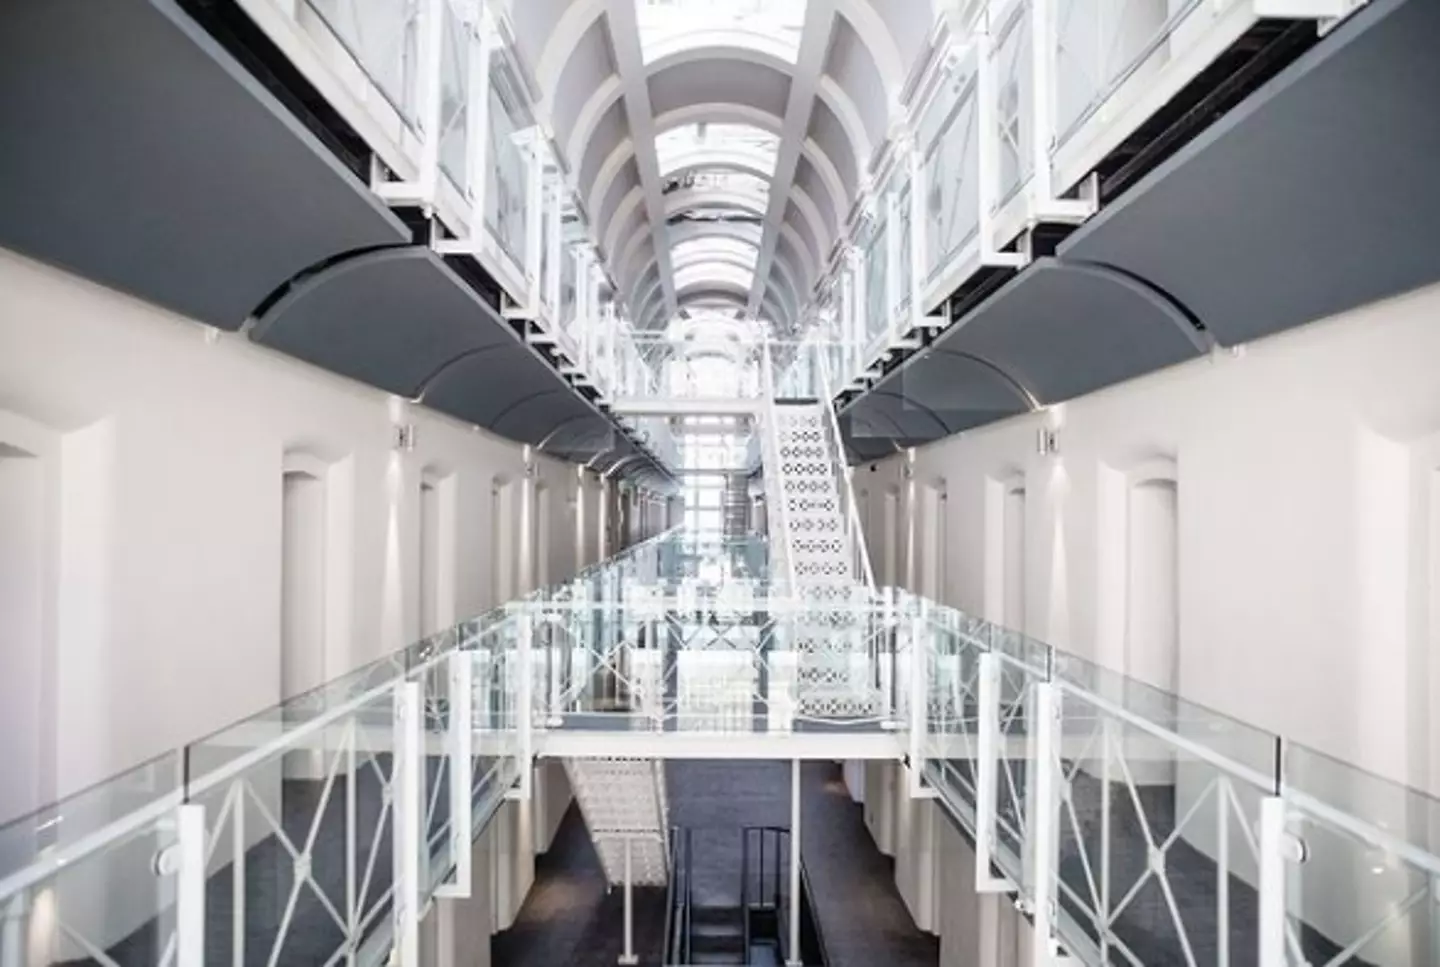 Fancy staying in a converted jail? (